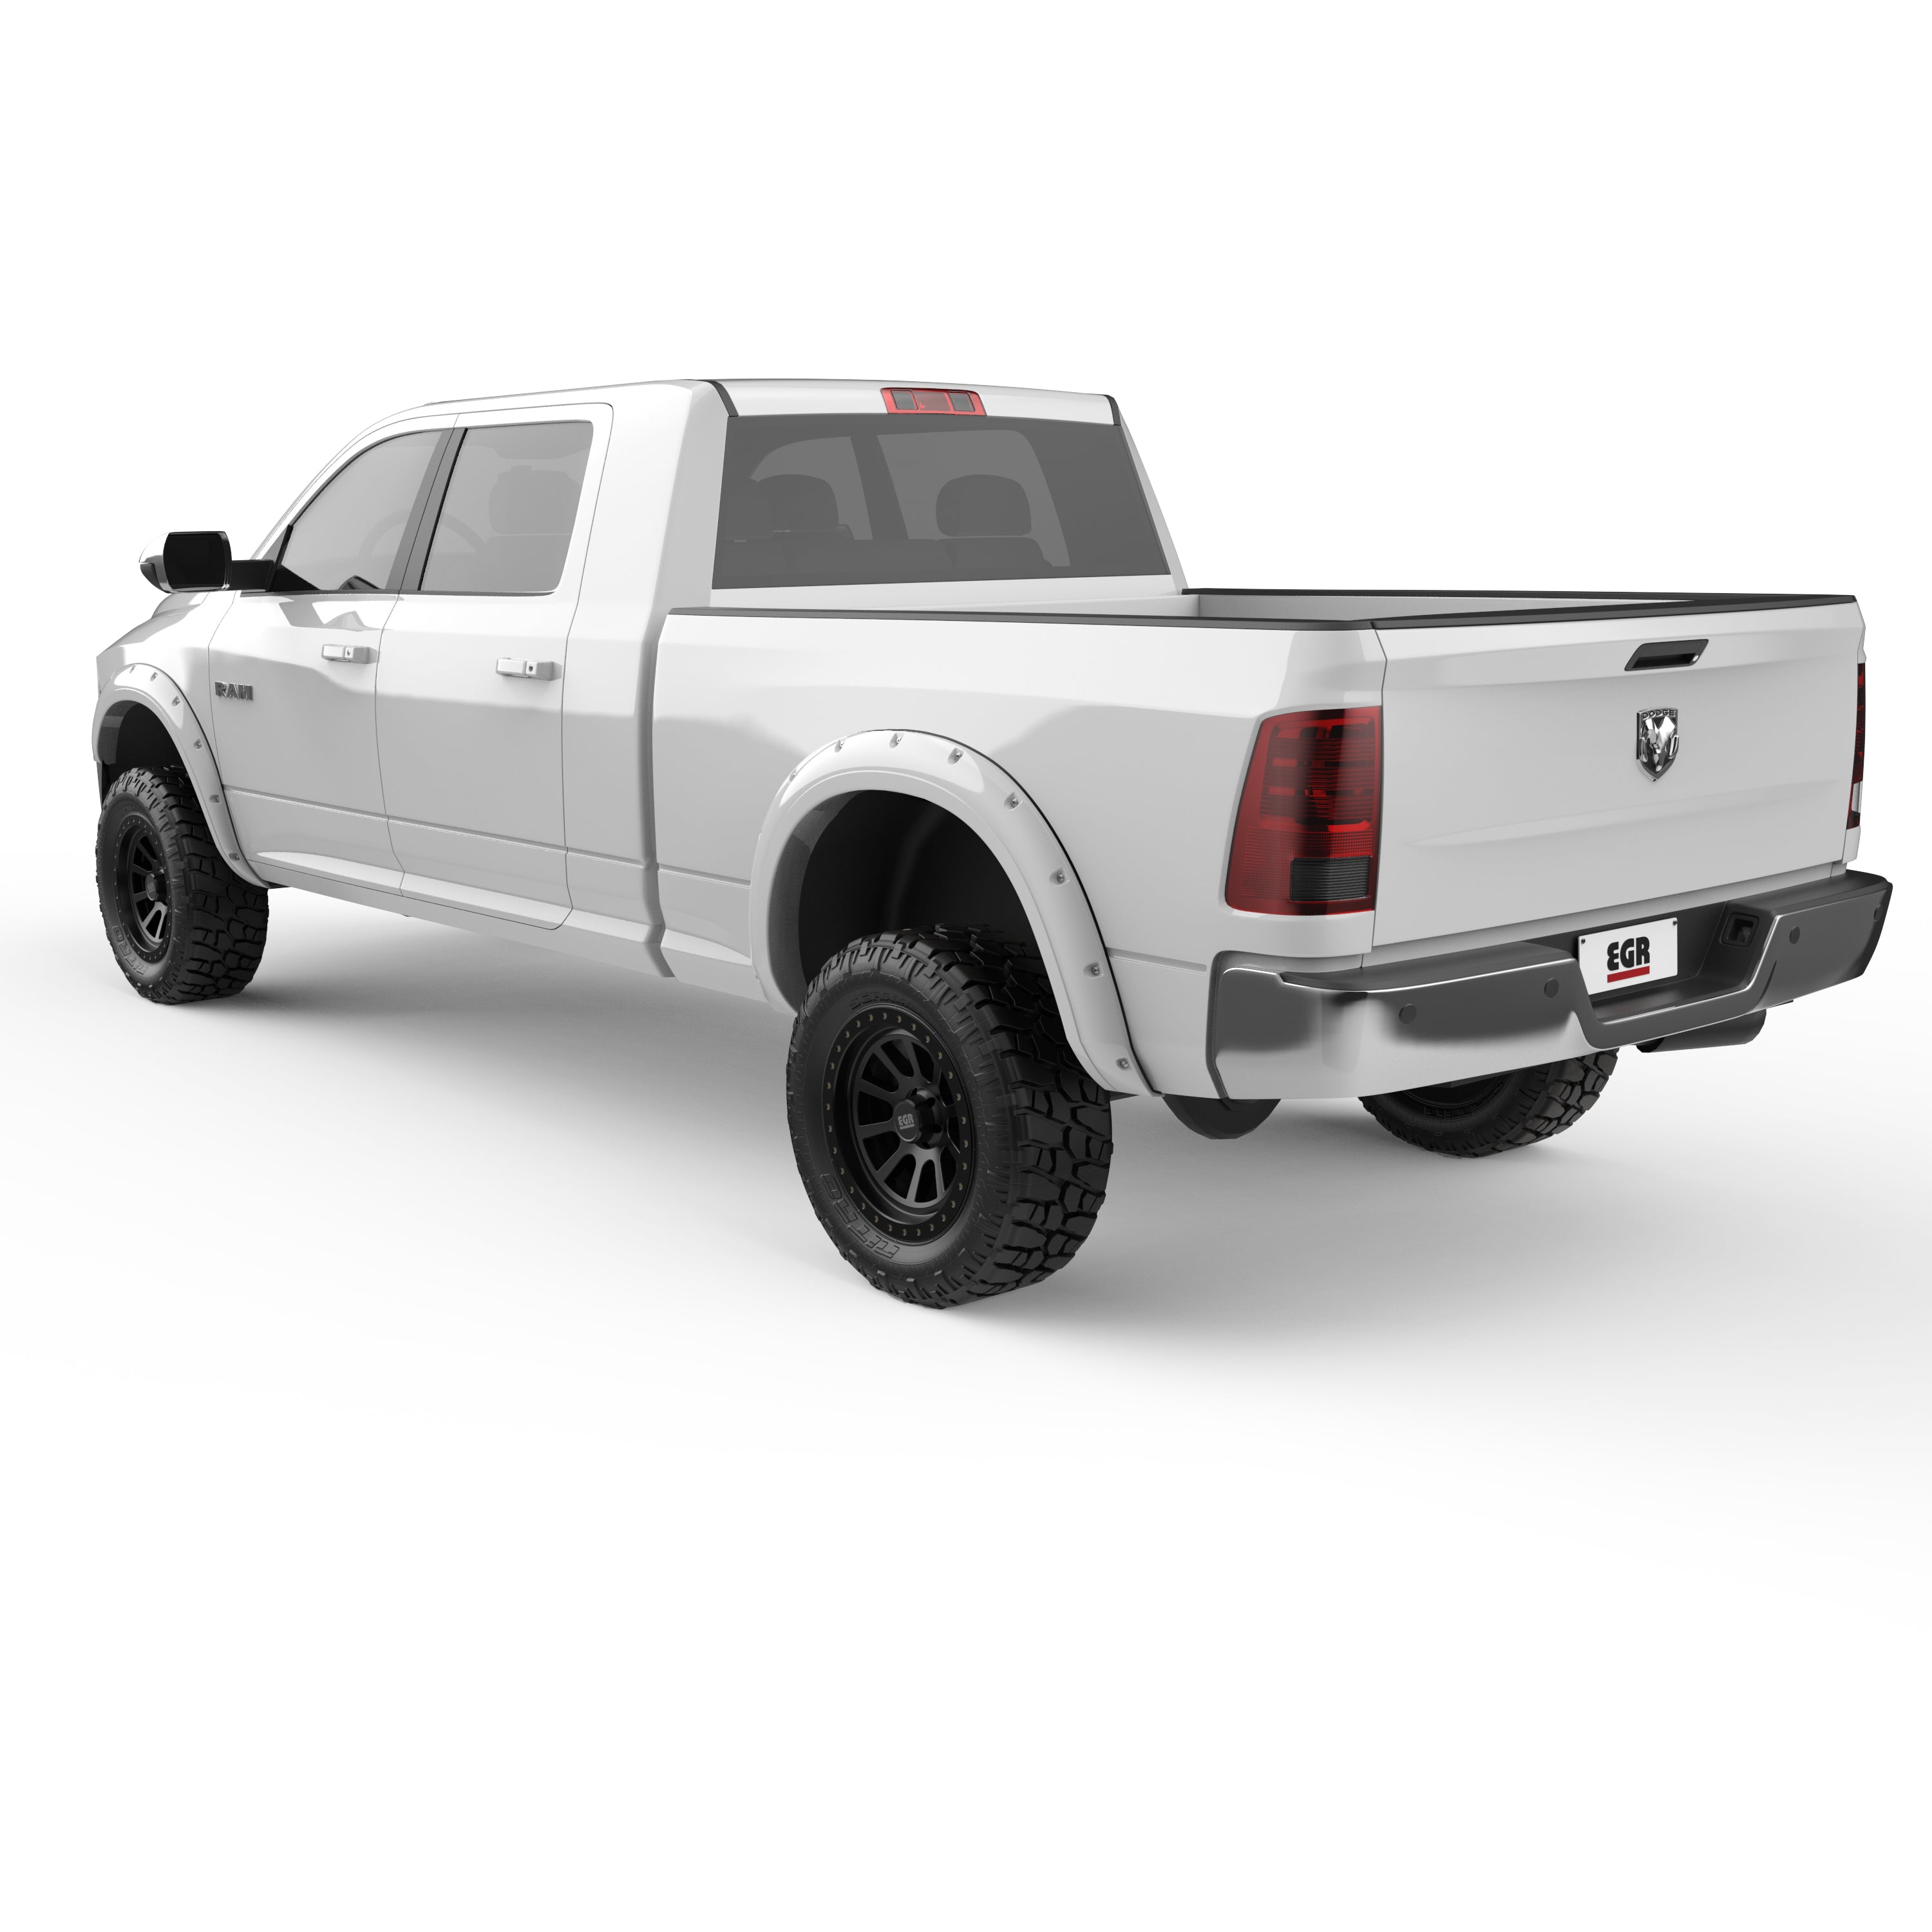 EGR Traditional Bolt-on look Fender Flares 11-18 Ram 2500 & 3500 2010 Dodge Ram 2500 & 3500 Painted to Code Bright White set of 4